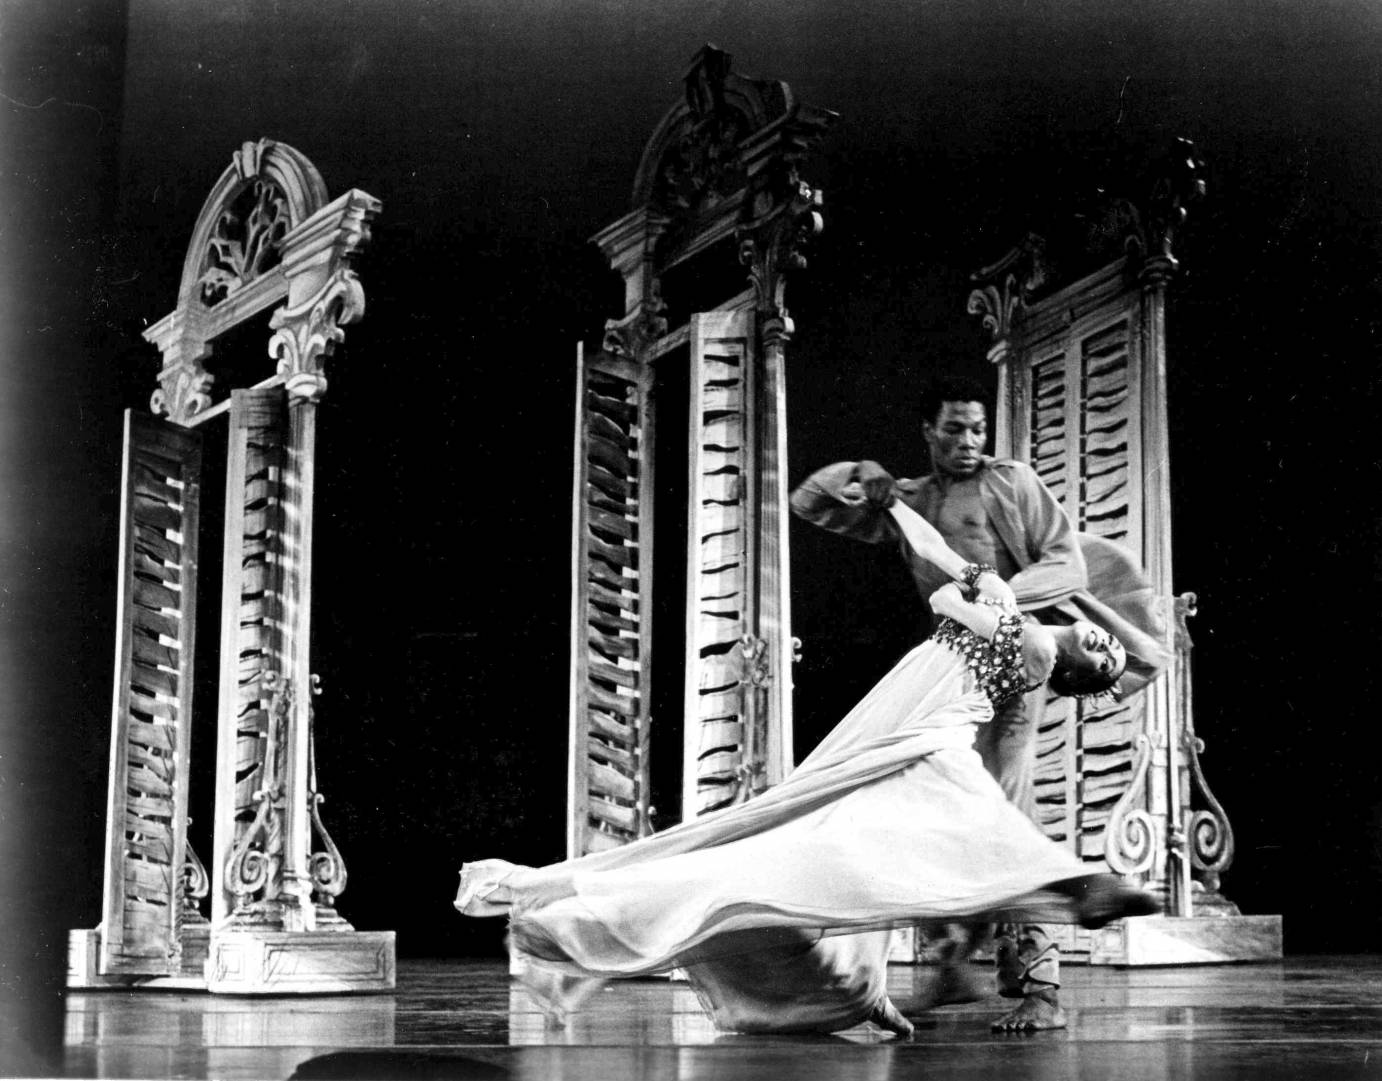 Story behind Dance Theatre of Harlem's new work